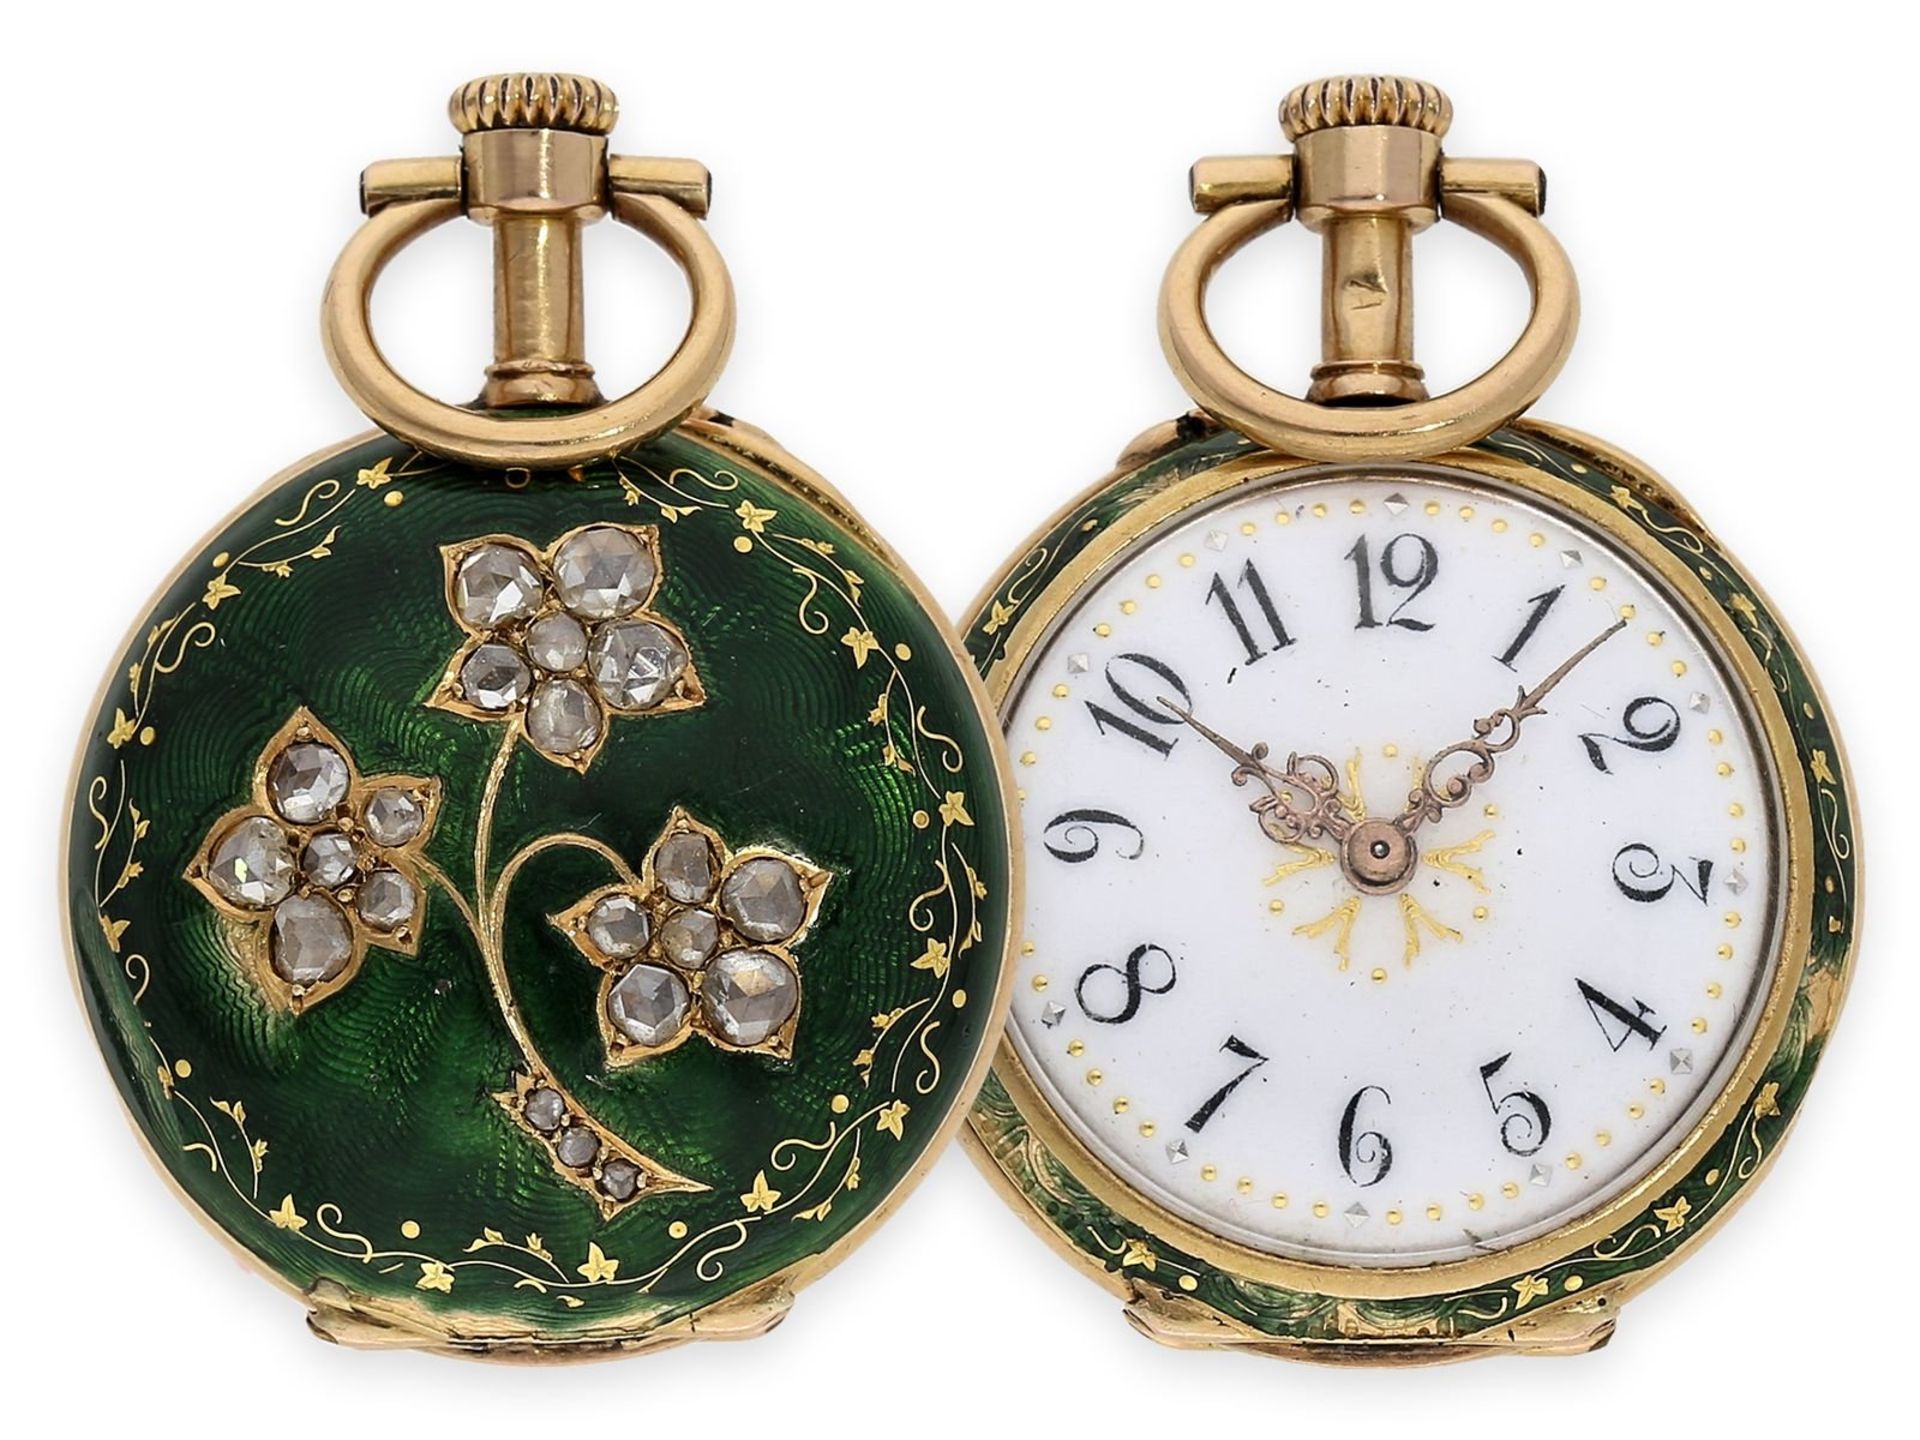 Pendant watch: exquisite gold/ enamel lady's watch with diamond setting, No. 37168, attributed to Le